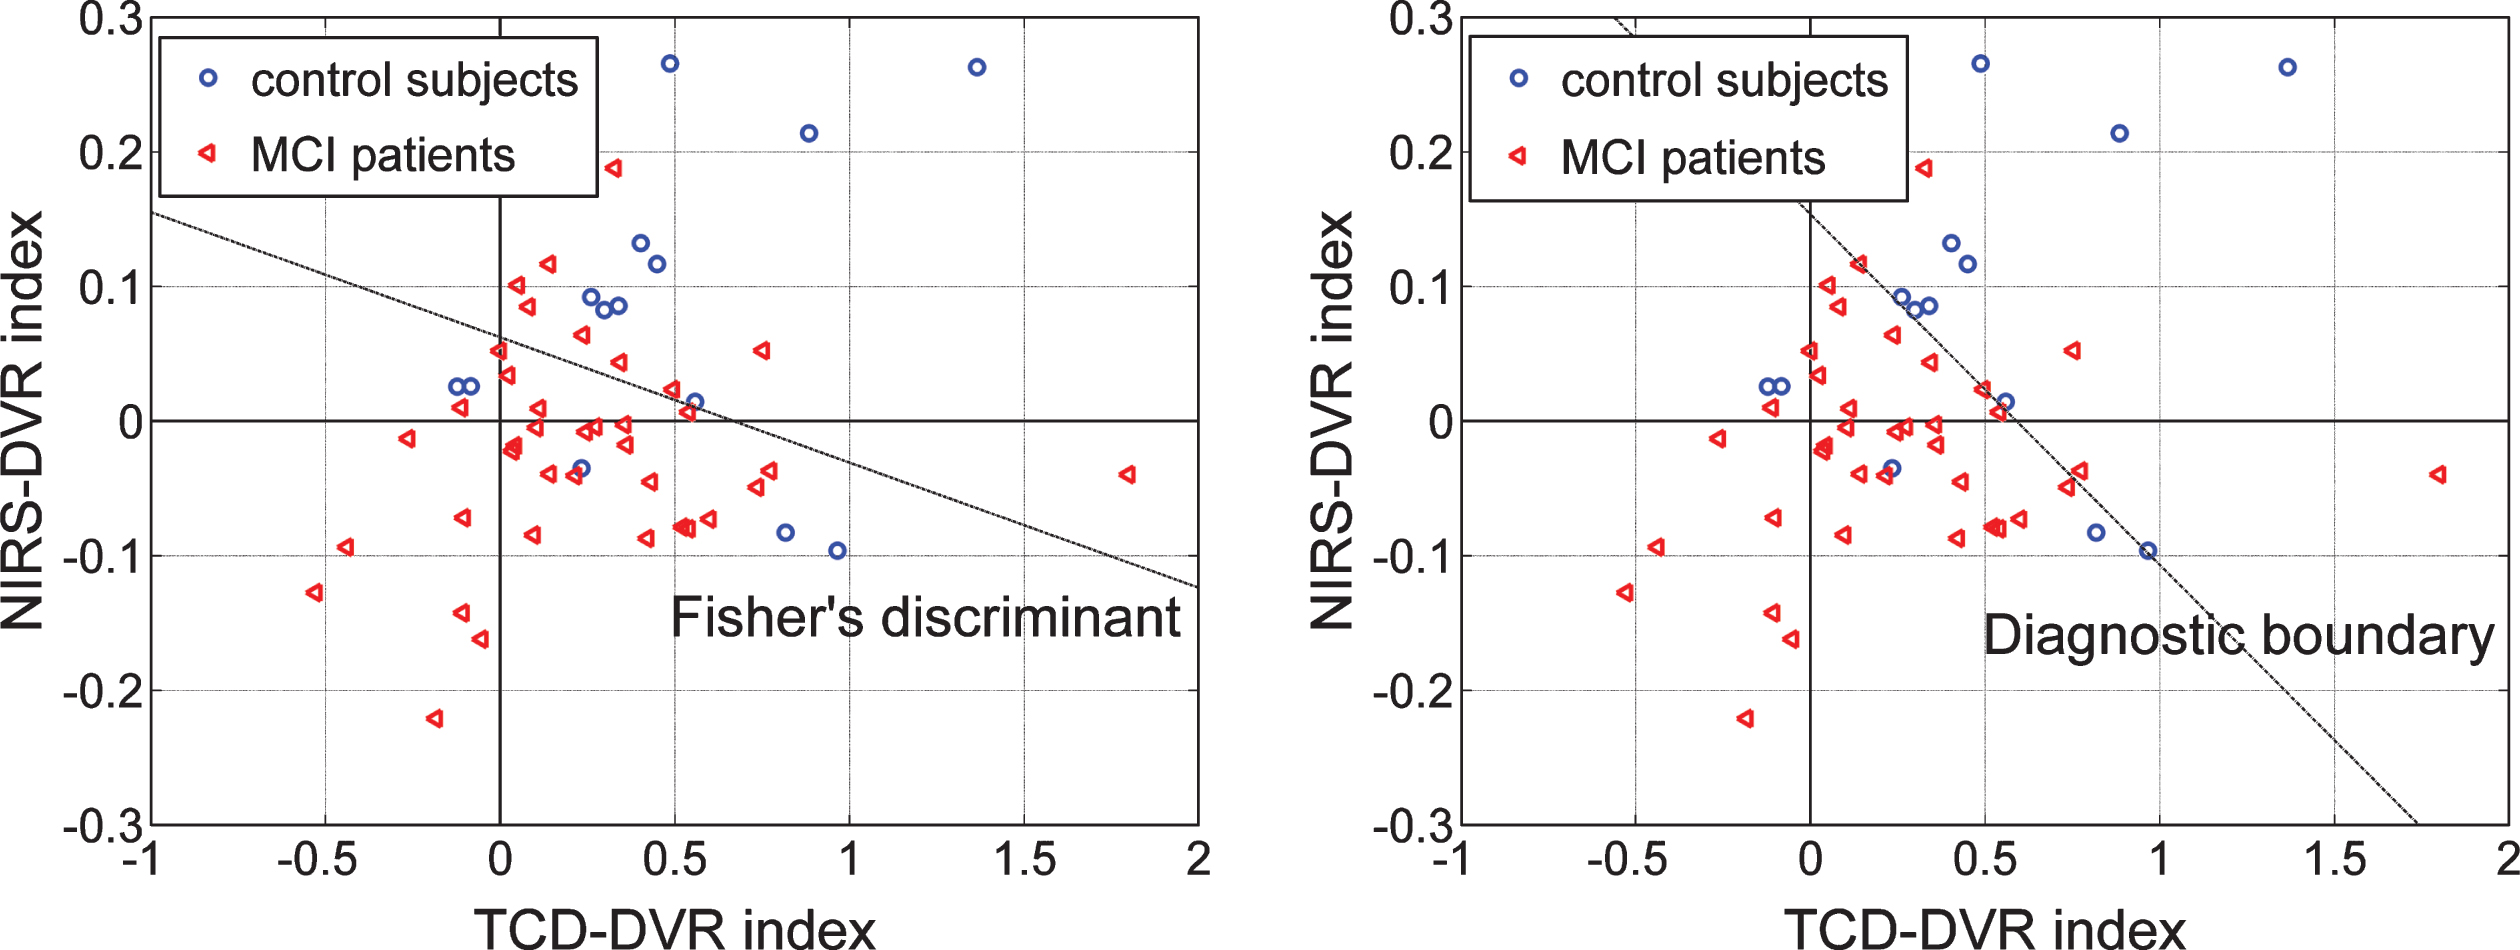 Scatter-plots of TCD-DVR versus NIRS-DVR indices for 14 controls (blue circles) and 38 patients (red triangle) who have both types of output recordings. The dashed line in each plot indicates a possible separation line between the two groups (Fisher’s Linear Discriminant in the left panel, and “diagnostic boundary” in the right panel determined by optimization algorithm) that corresponds to a composite index with p-value smaller than the separate p-values of each index shown in Tables 6 and 7—specifically, p = 0.0044 for Fisher’s Discriminant and p = 0.0049 for the “diagnostic boundary. The latter has a slightly higher p-value but yields better classification/diagnostic results.